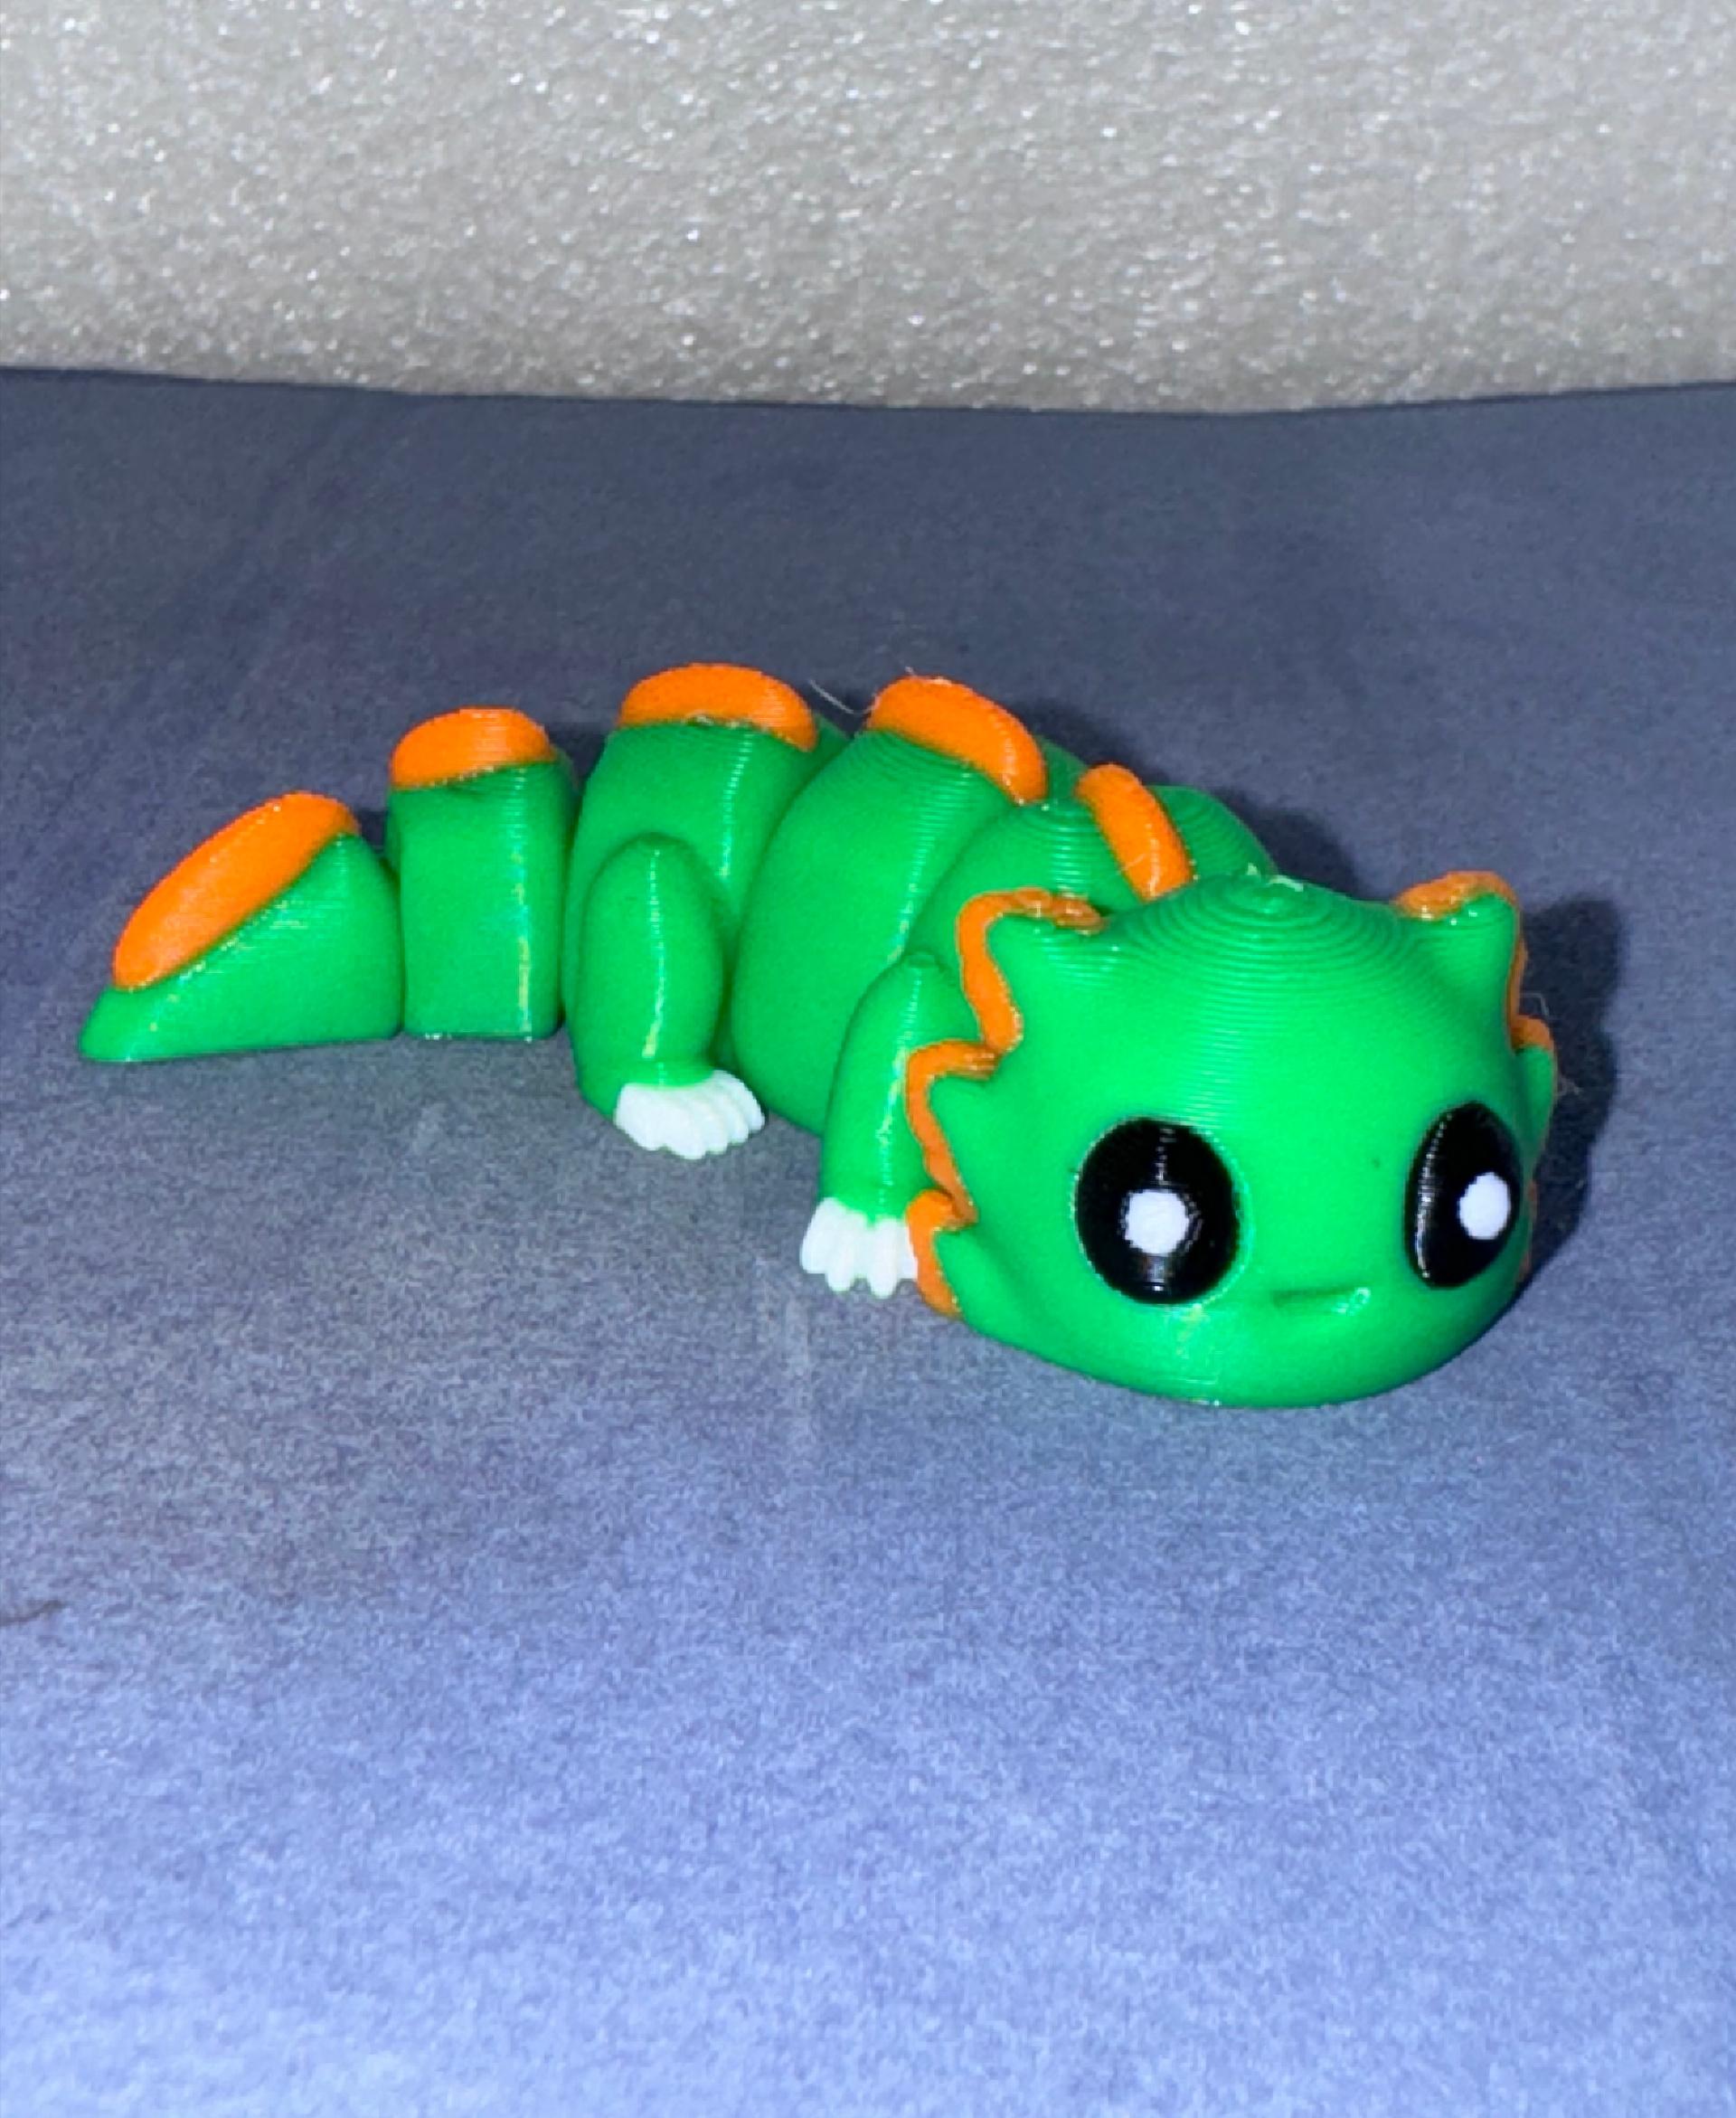 Axolotl Fidget - This little guy is happy to be.
Bambu PLA green and orange, Eryone PLA black and white. - 3d model